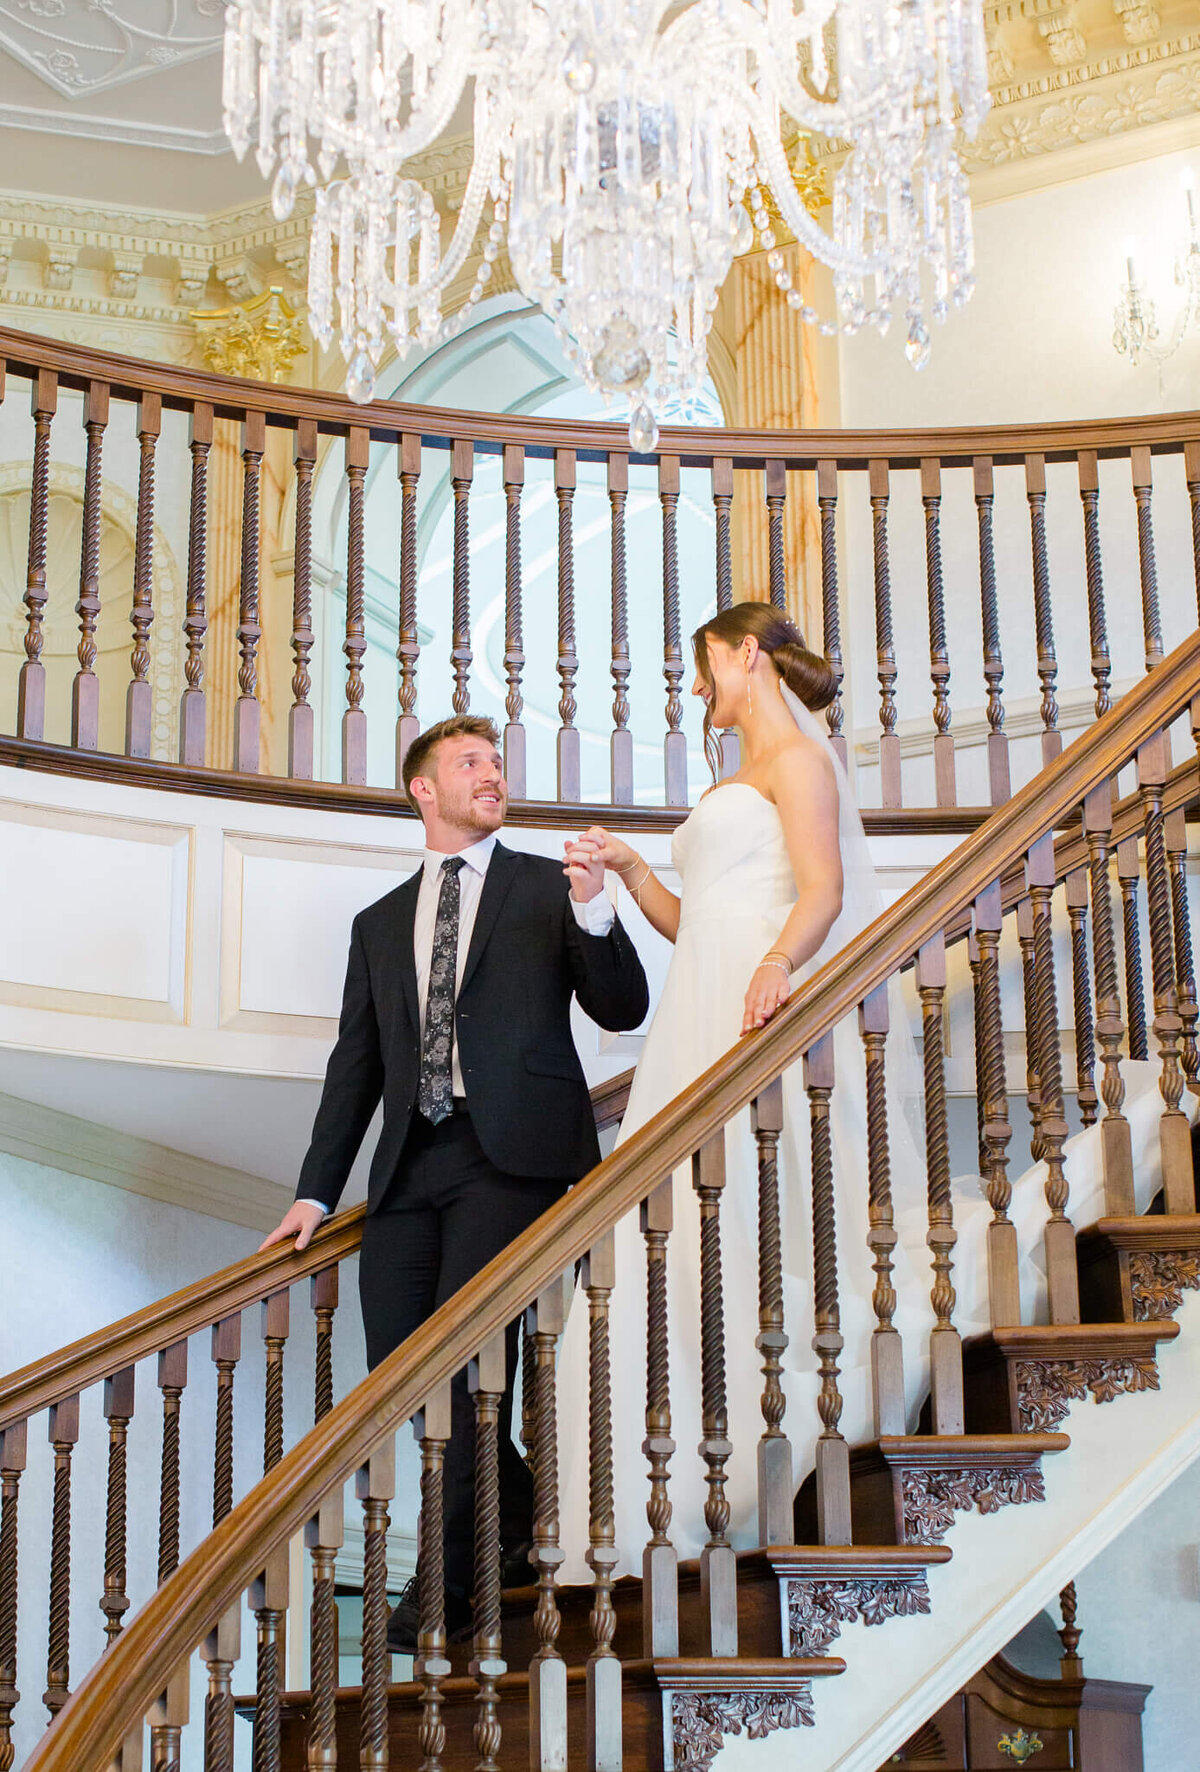 Bride and Groom walking down the stairs in the foyer at The Estate at River Run in Maidens, Virginia. Captured by Charlottesville Wedding Photographer Bethany Aubre Photography.